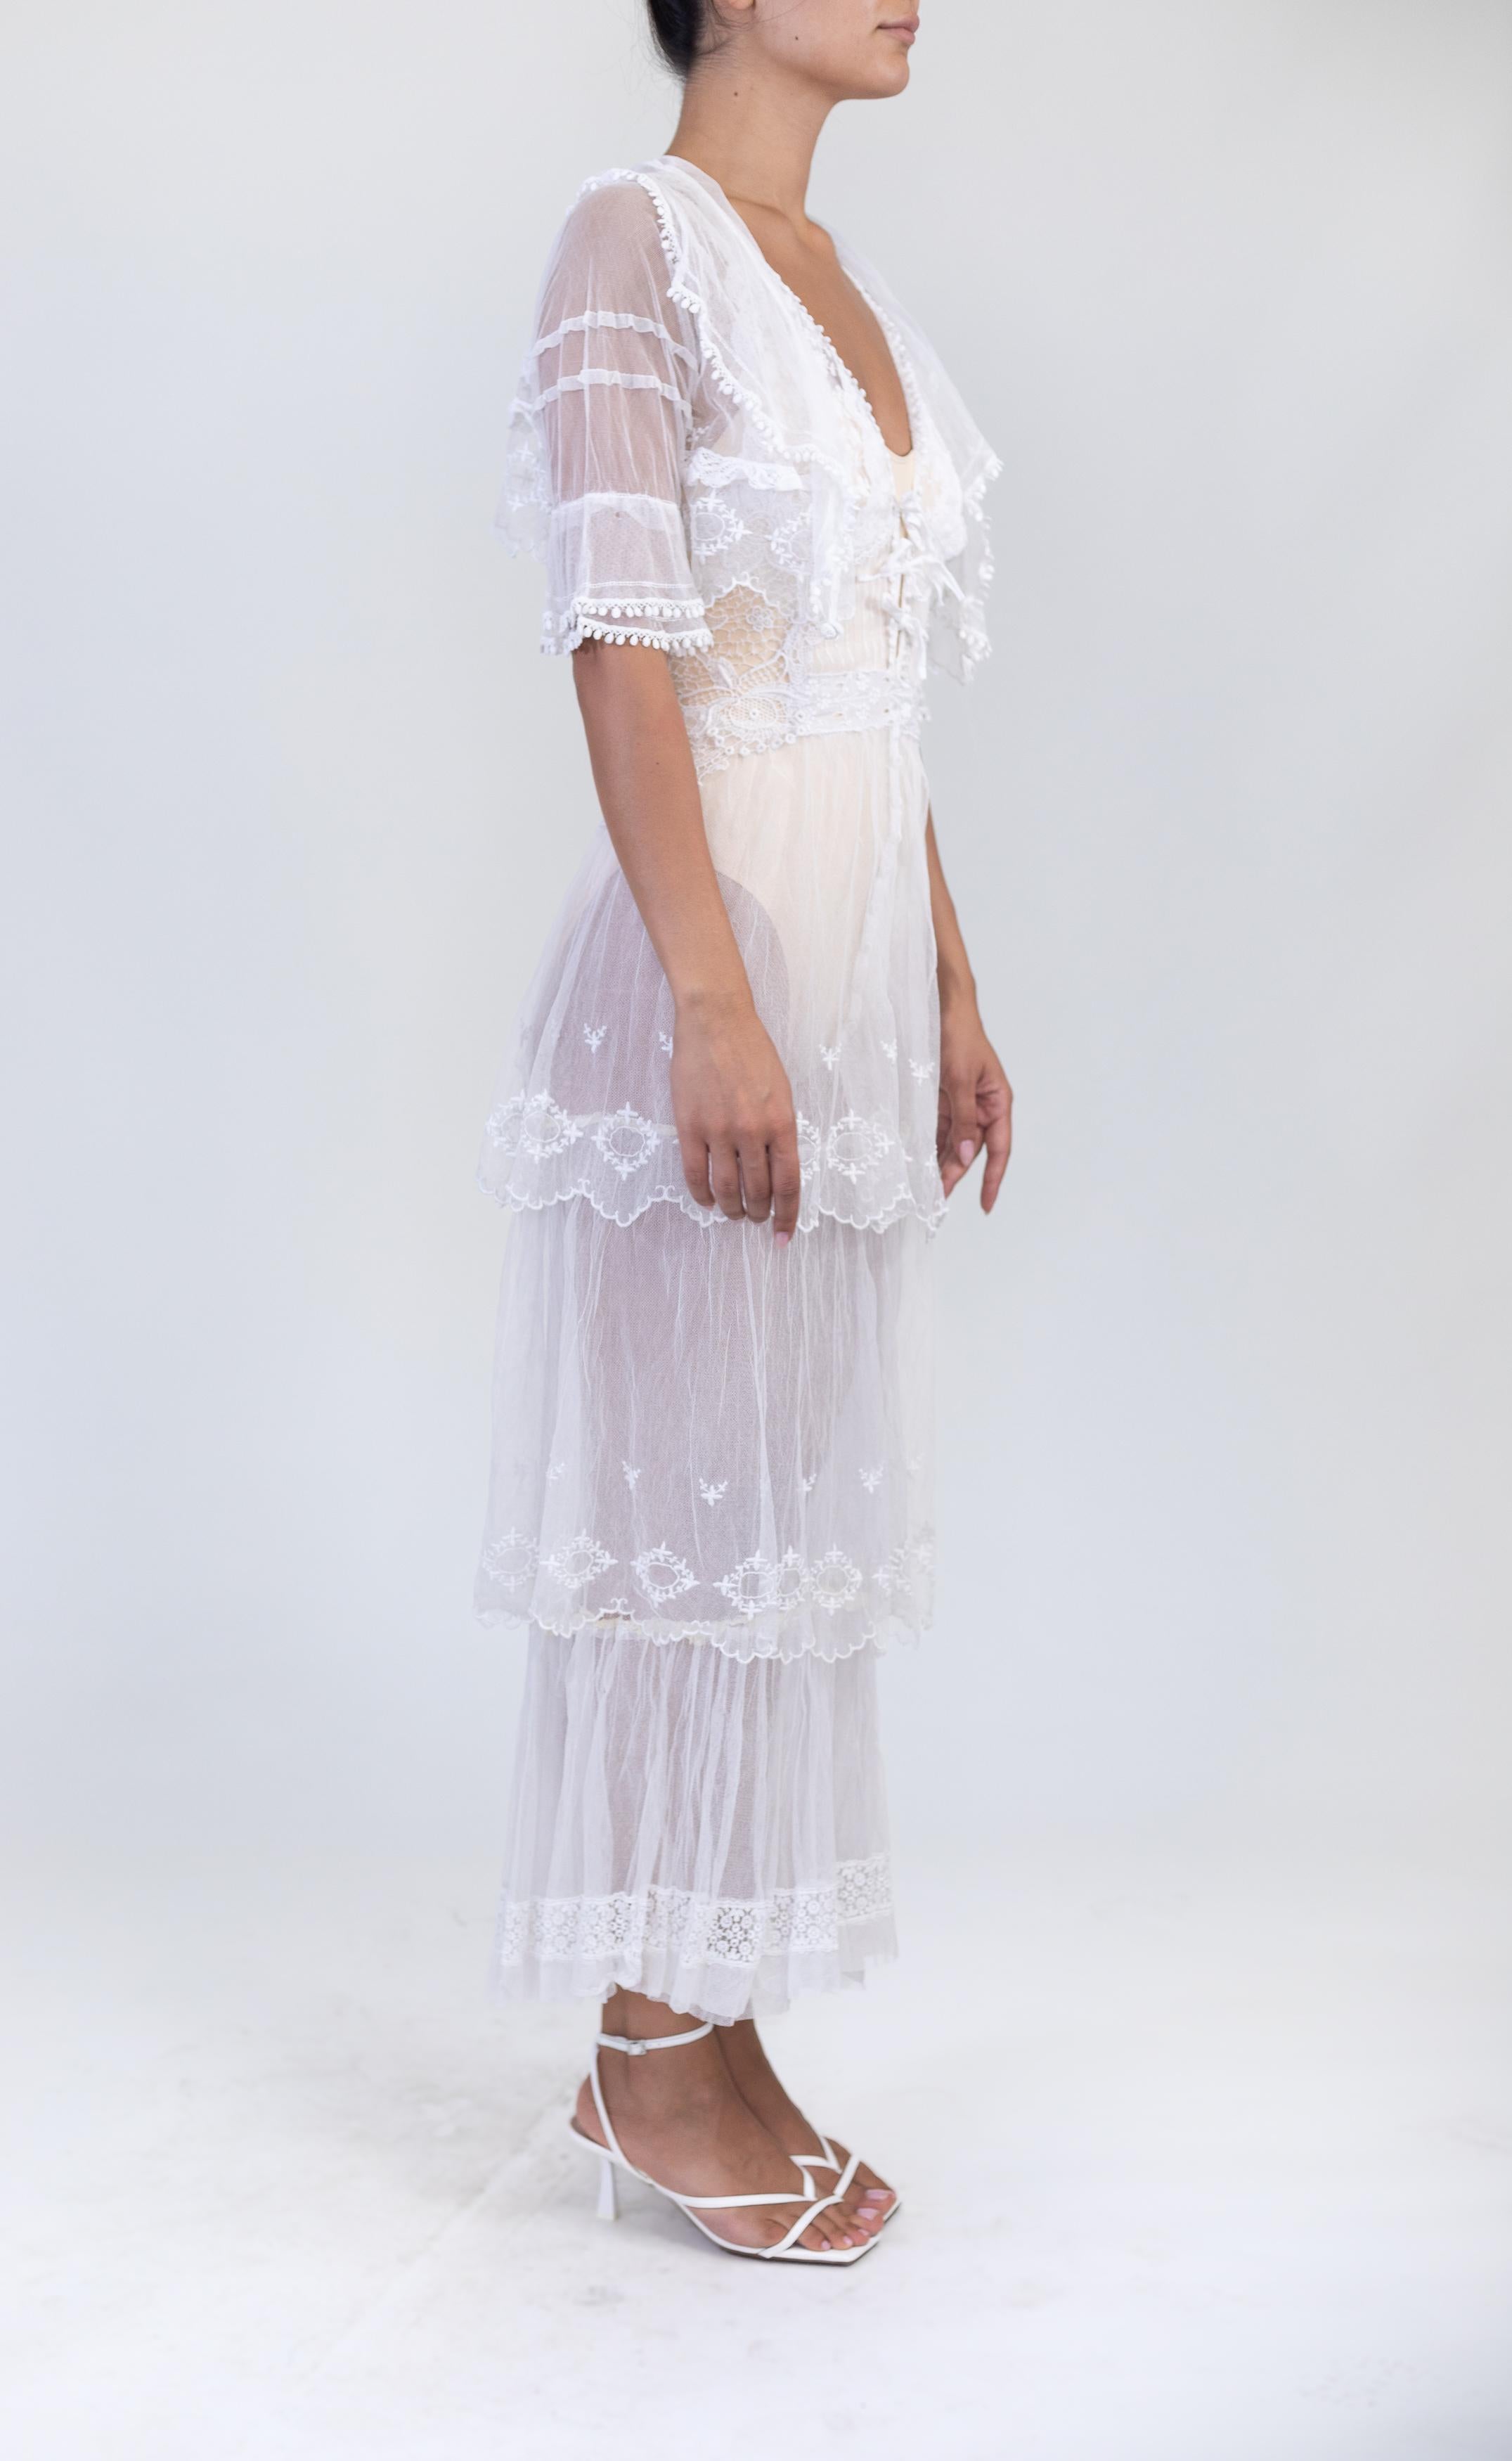 Morphew Atelier White Backless Organic Cotton Embroidered Tulle Victorian Lace Dress With Jacket